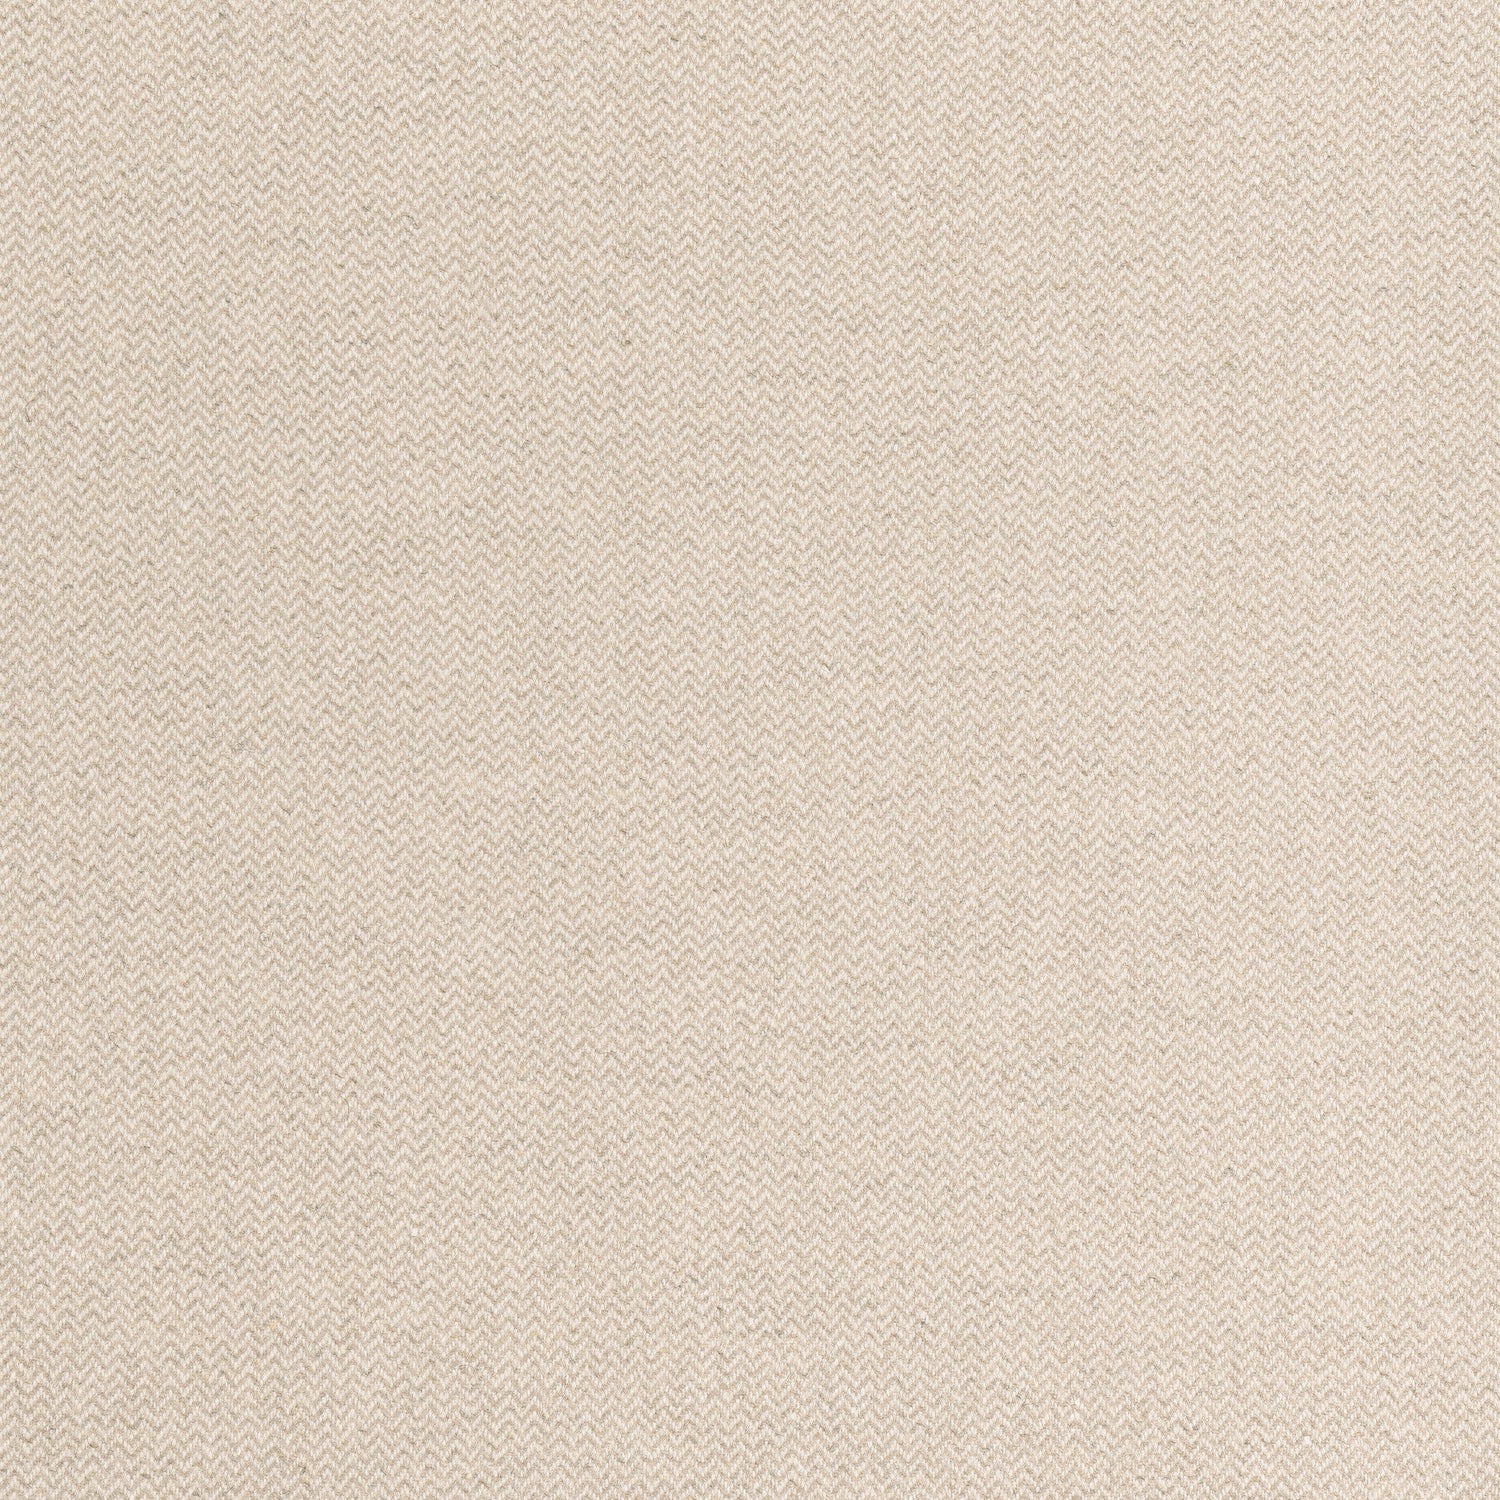 Dorset fabric in almond color - pattern number W80920 - by Thibaut in the Dunmore collection